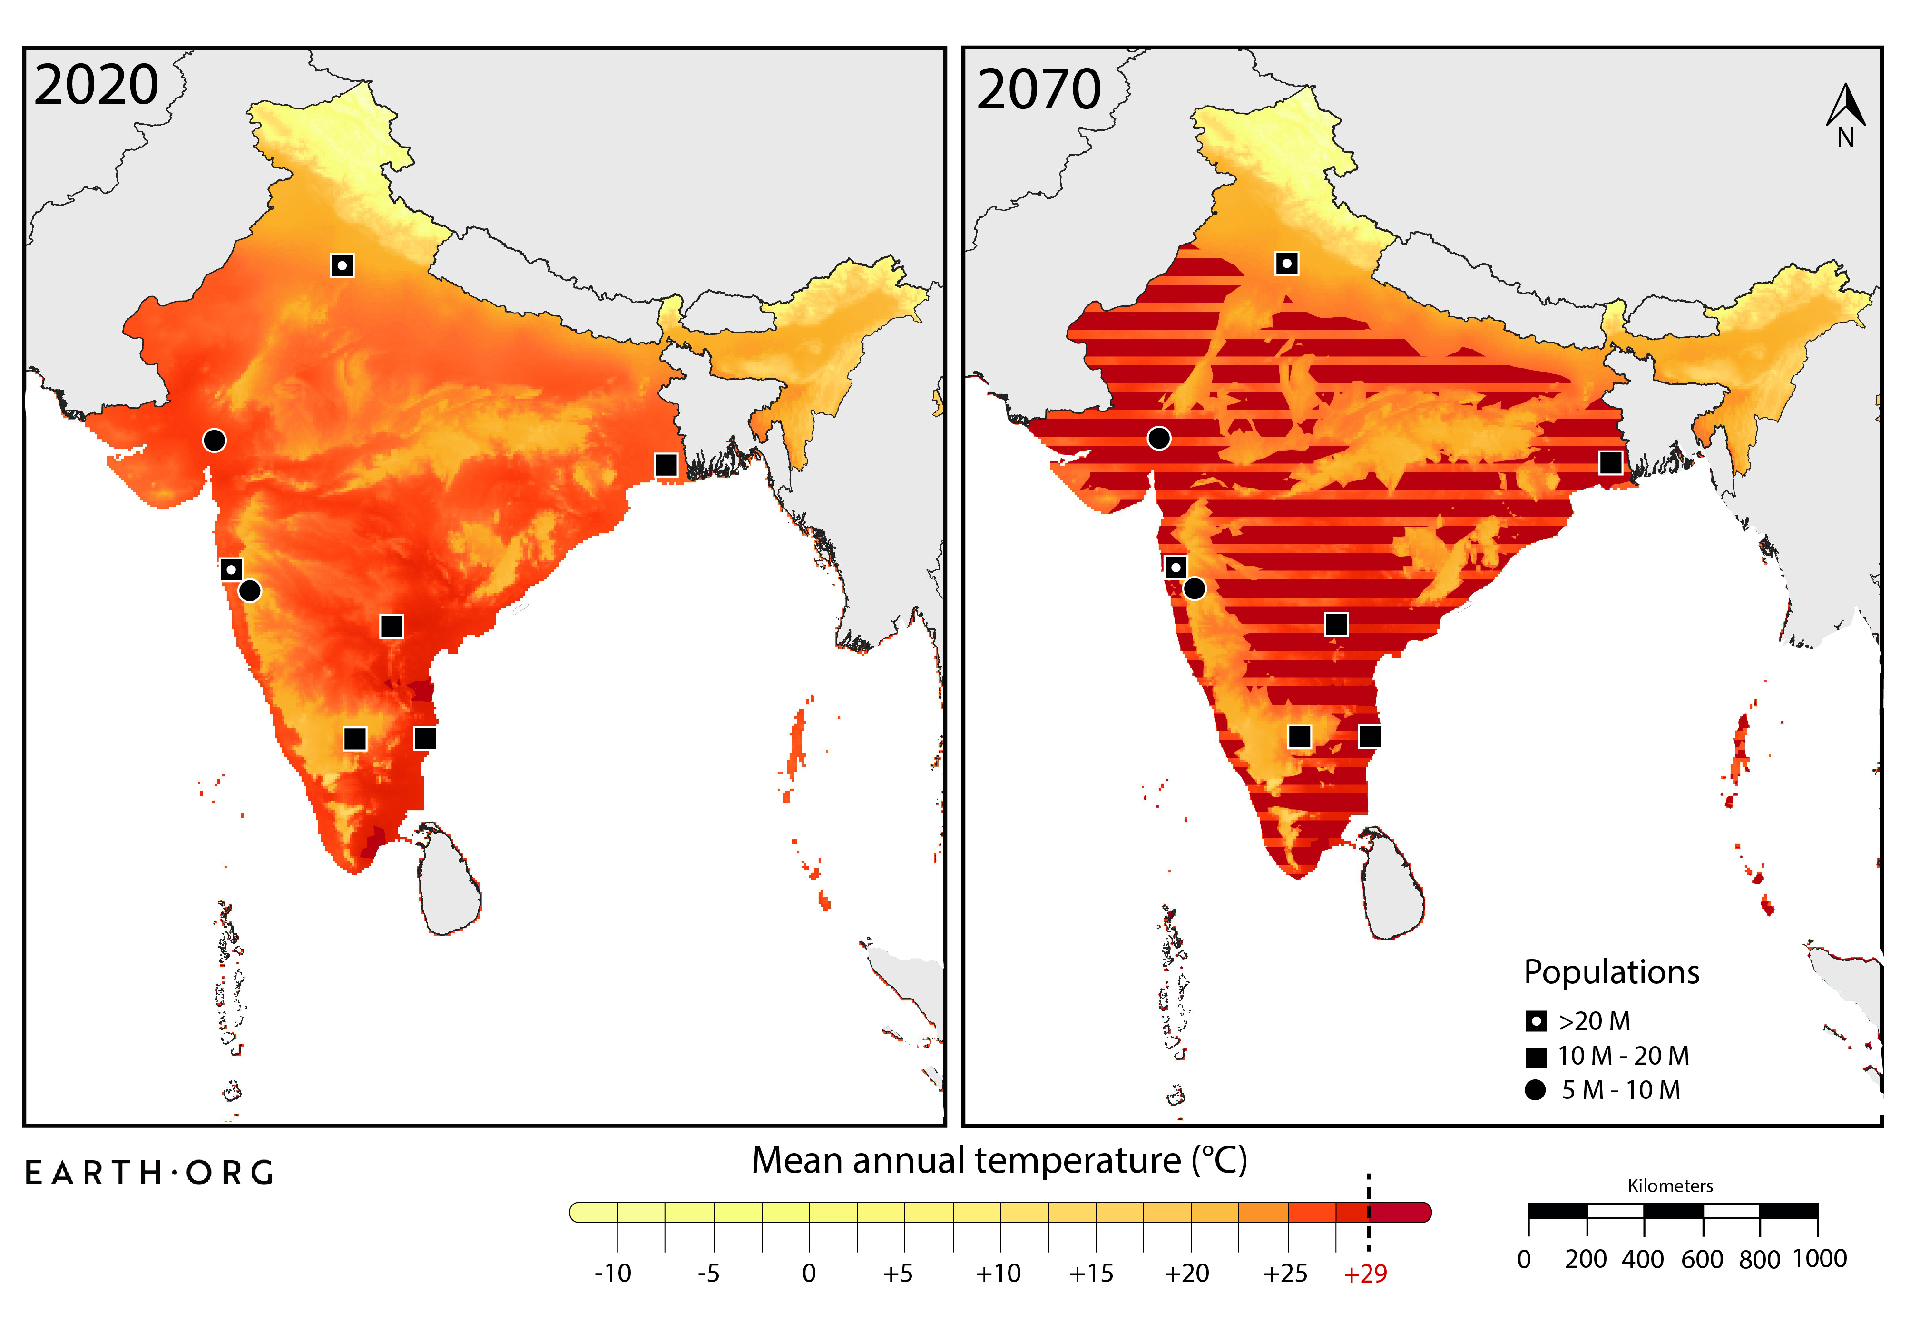 India too hot to live 2070